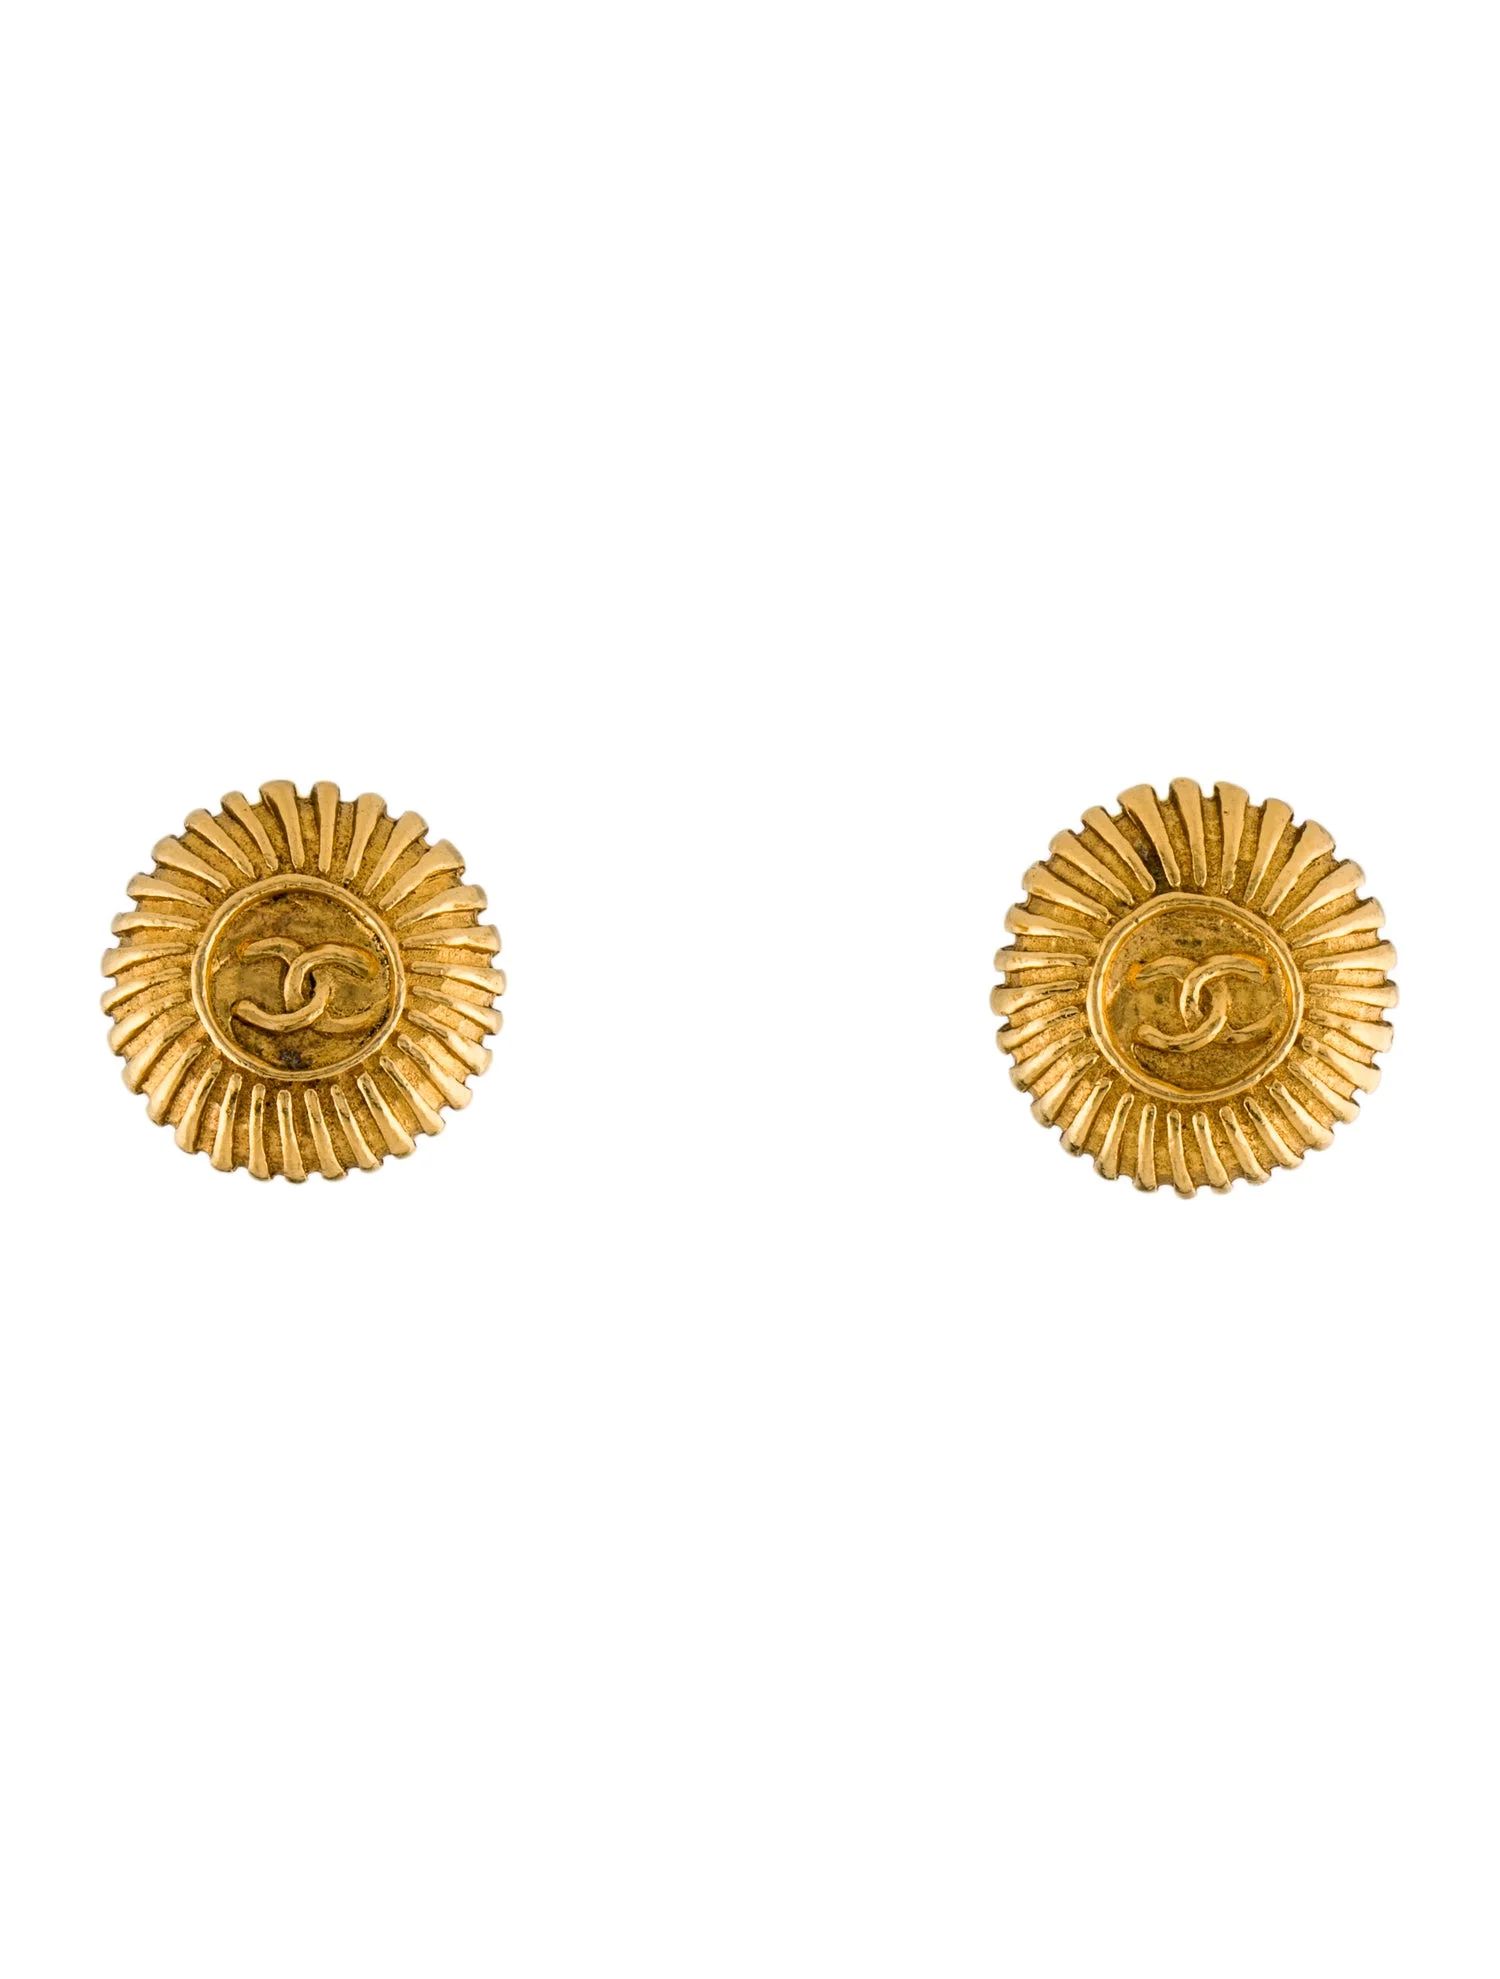 Vintage CC Clip-On Earrings | The RealReal